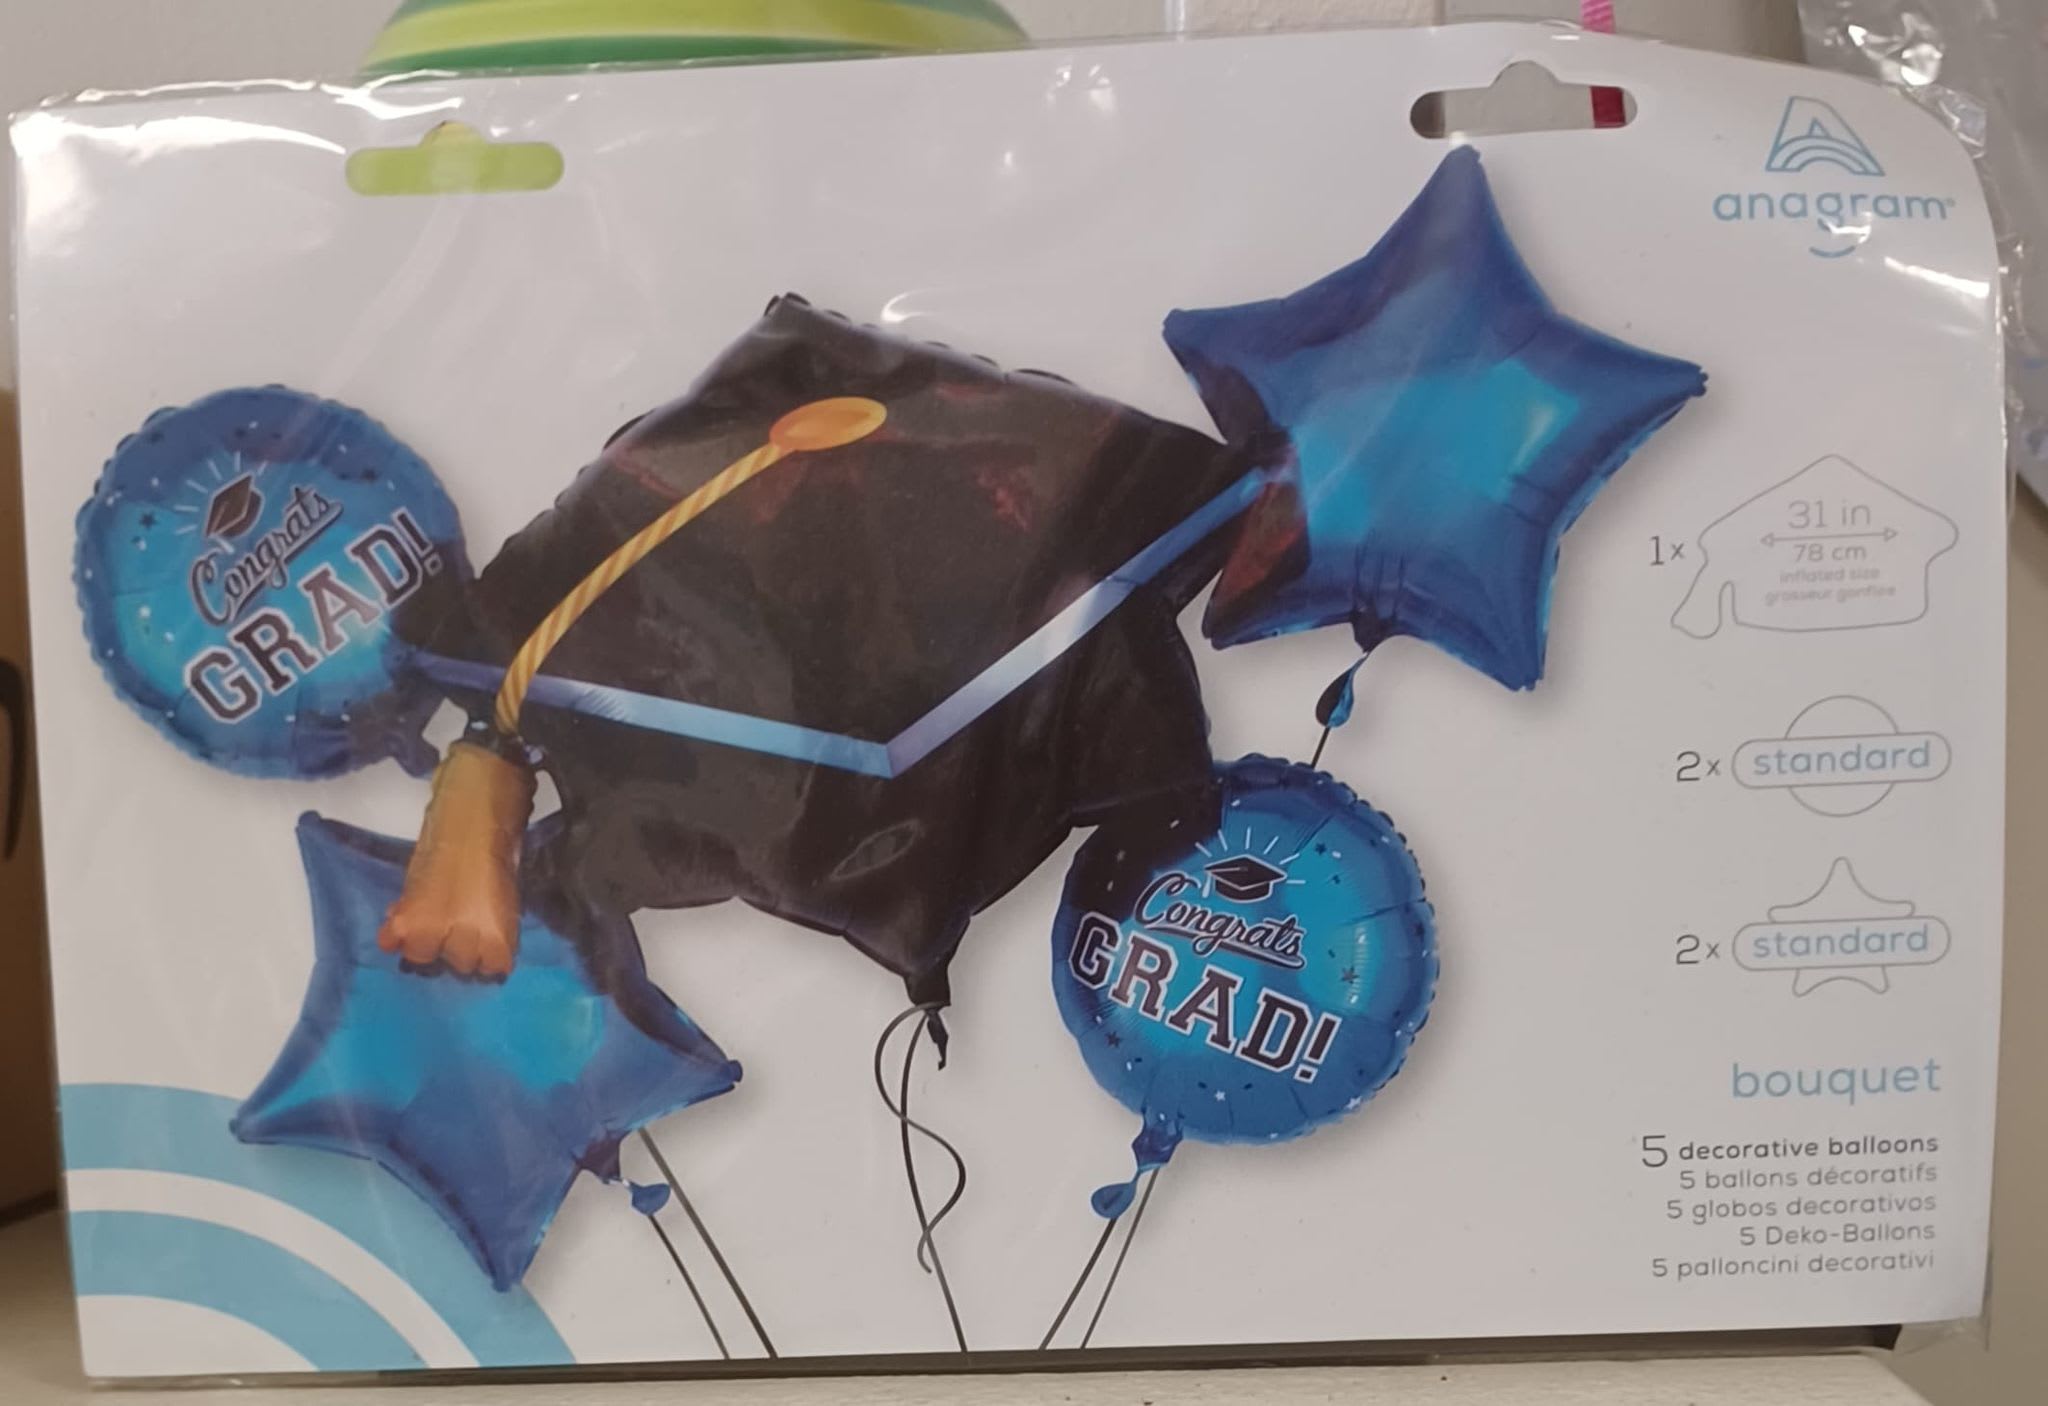 Blue and Black Graduation Balloon Bouquet - Each bouquet has- 1- 31in Cap Mylar Balloon 2- Blue 18in Round Mylars 2- Blue Star Mylars All tied to a festive weight to match